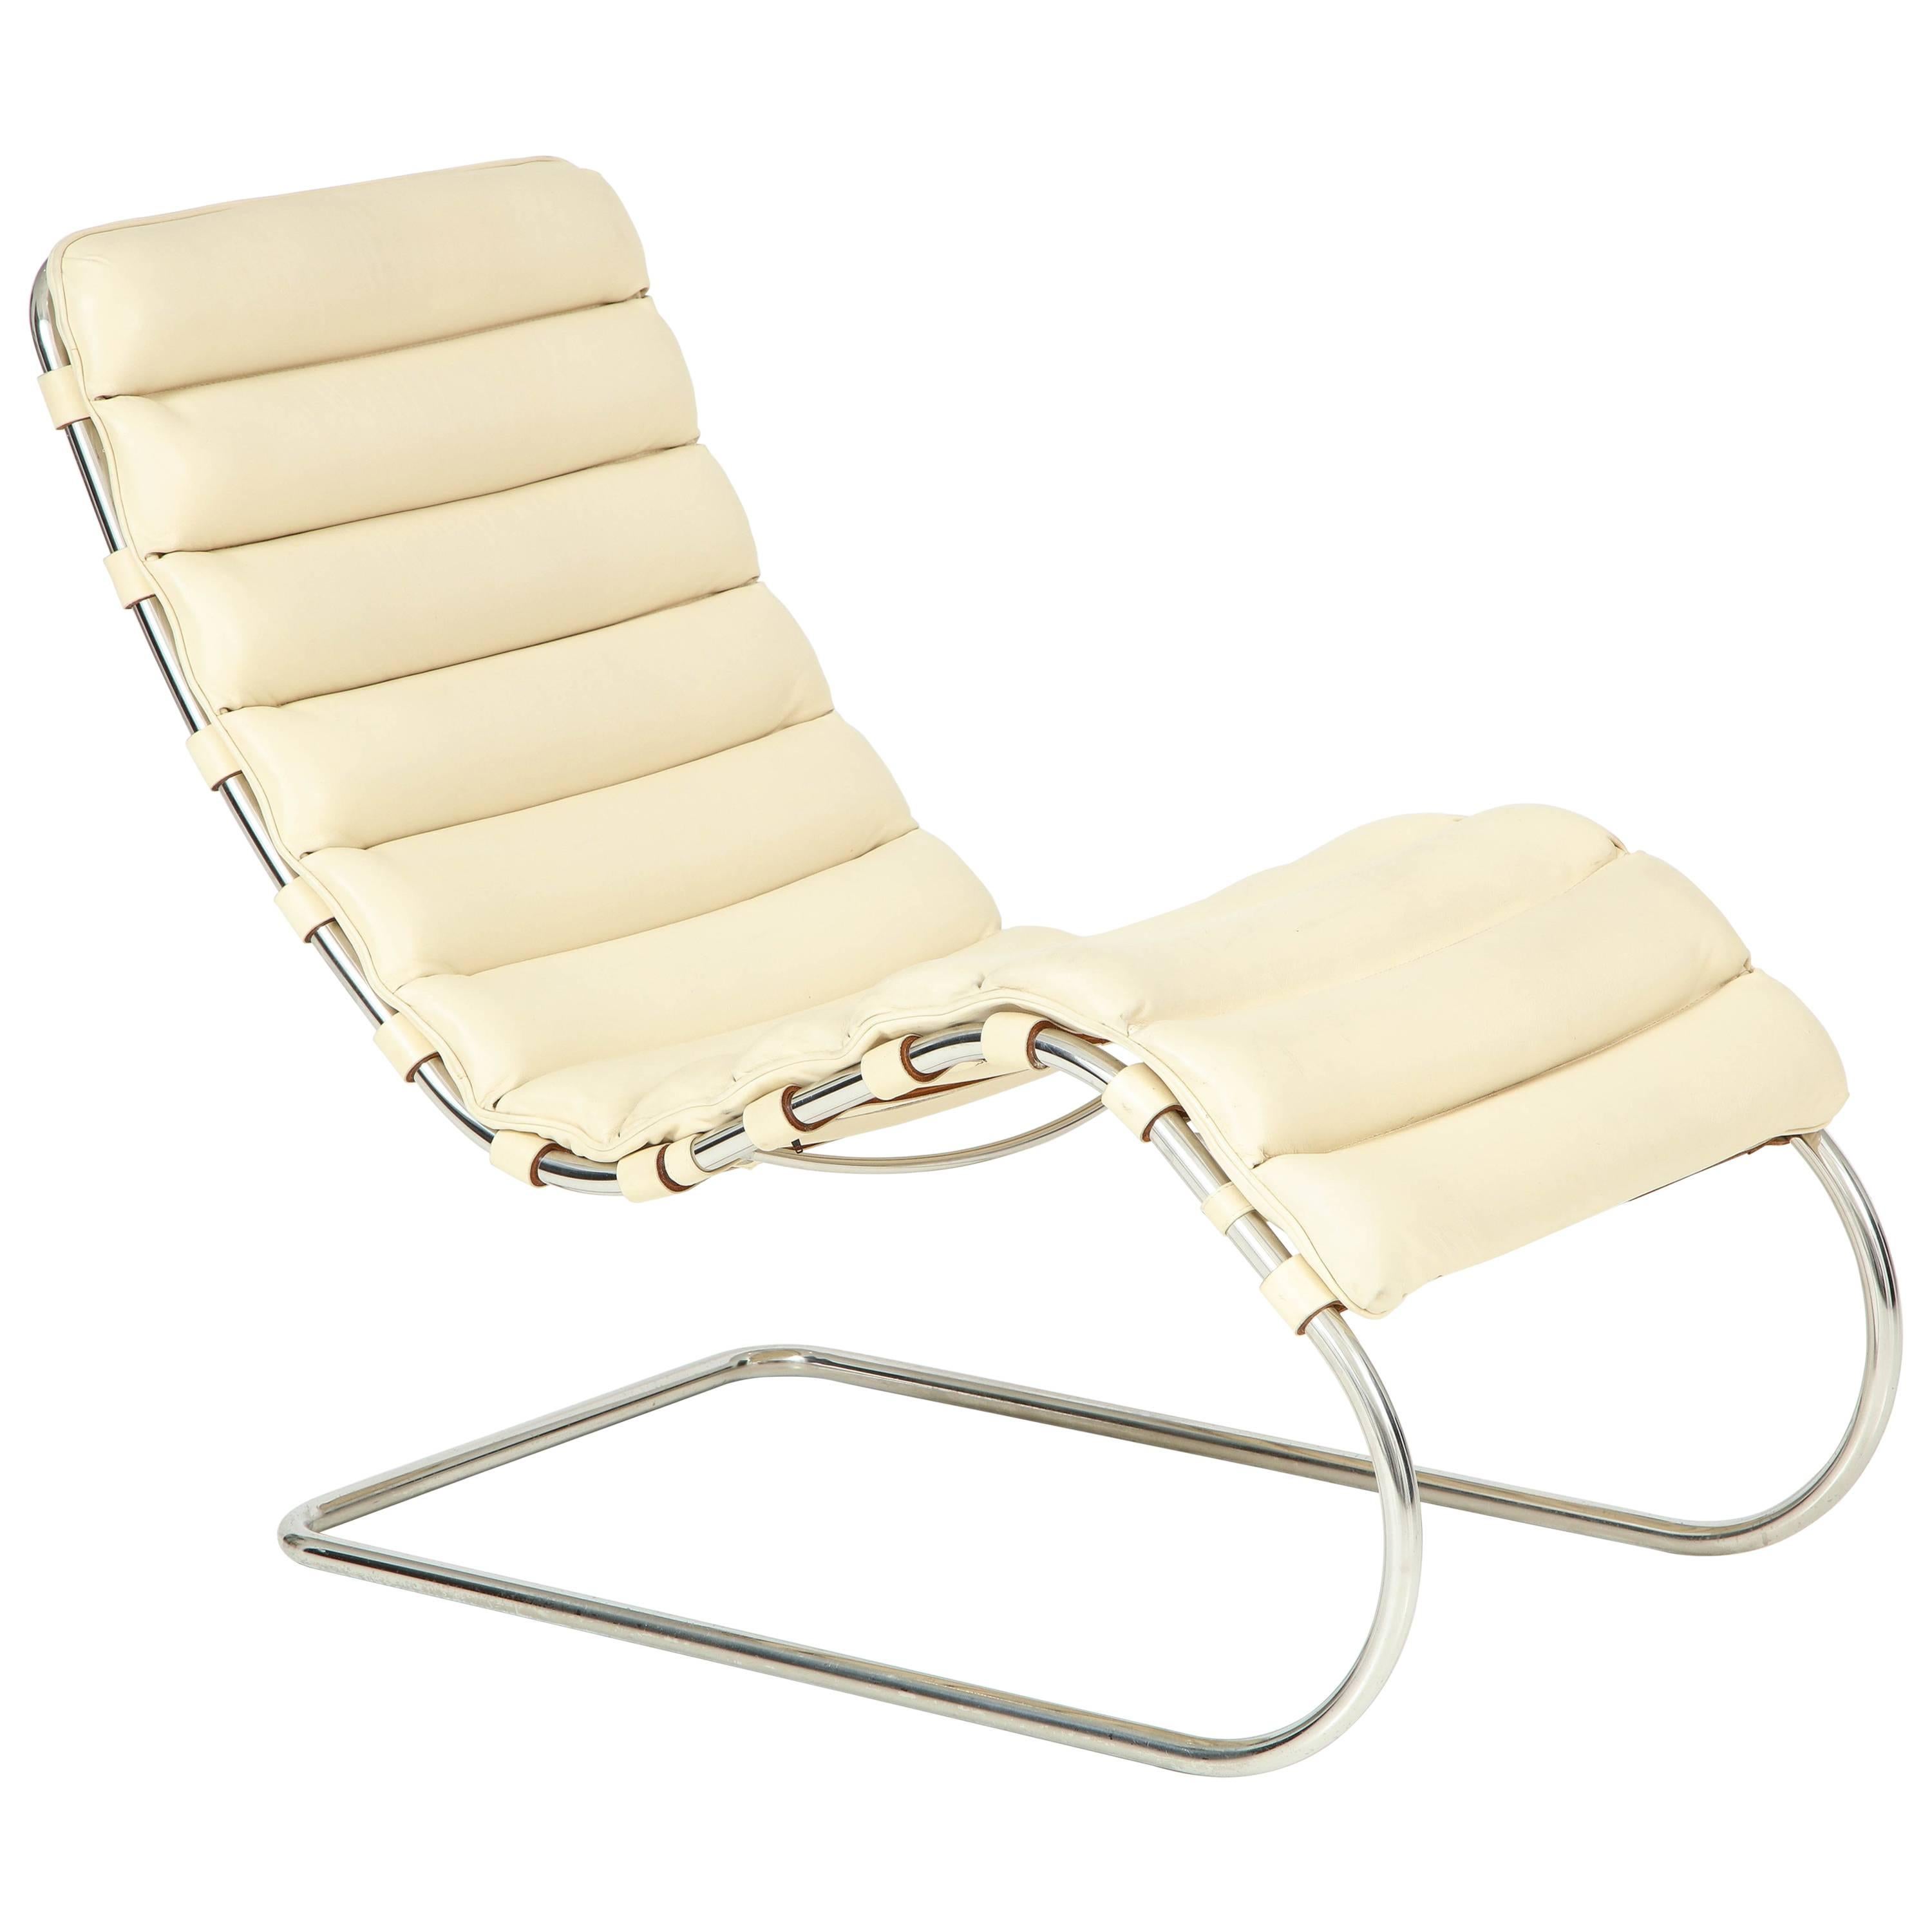 Ludwig Mies van der Rohe MR Chaise for Knoll, circa 1980s